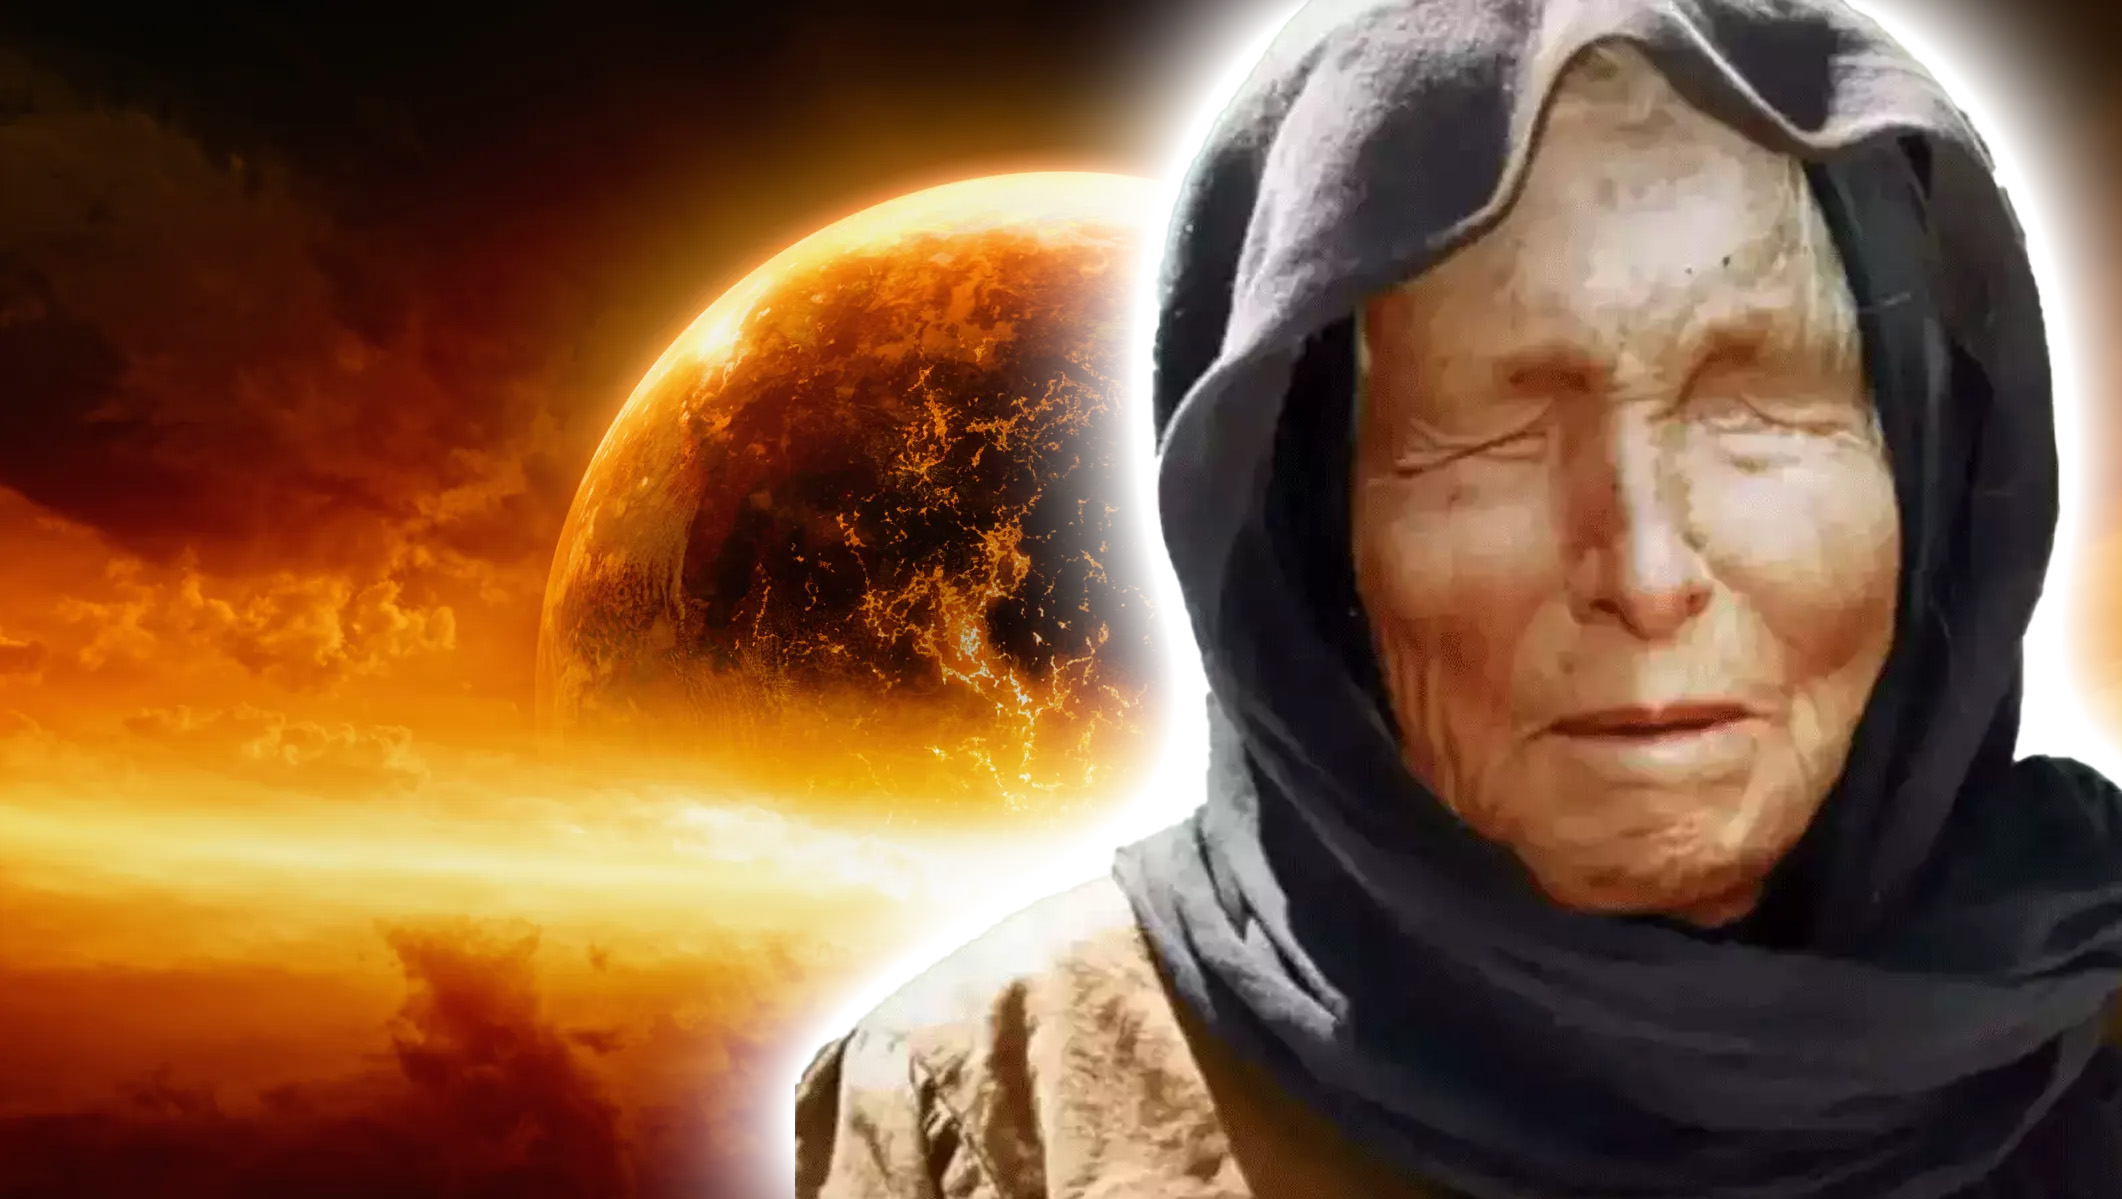 An illustration showing Baba Vanga and the end of the world.